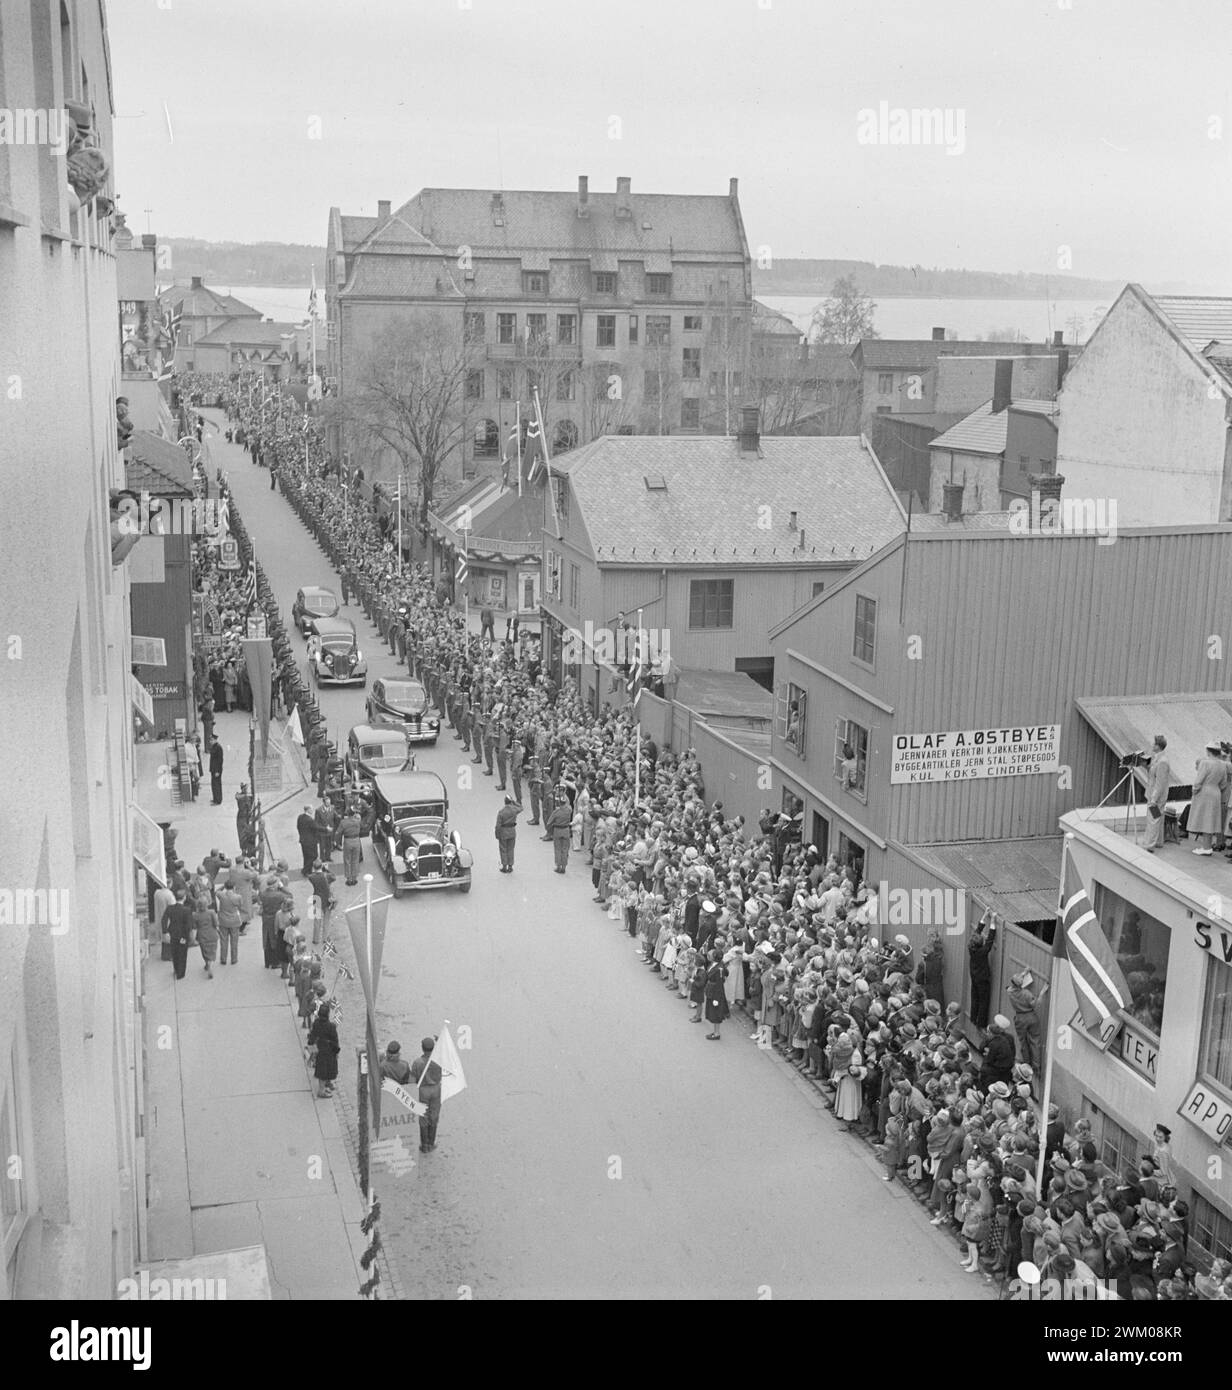 Actual 11-1949: It cannot be trueHamar celebrates and celebrates both its 100th anniversary and its 900th anniversary. About 900 years ago, the kings Harald Hårdråde and Magnus the Good met in Hamar to divide the land and kingdom, and from this time Hamar was considered a city.  Photo; Sverre A. Børretzen / Aktuell / NTB  ***PHOTO NOT IMAGE PROCESSED*** Stock Photo